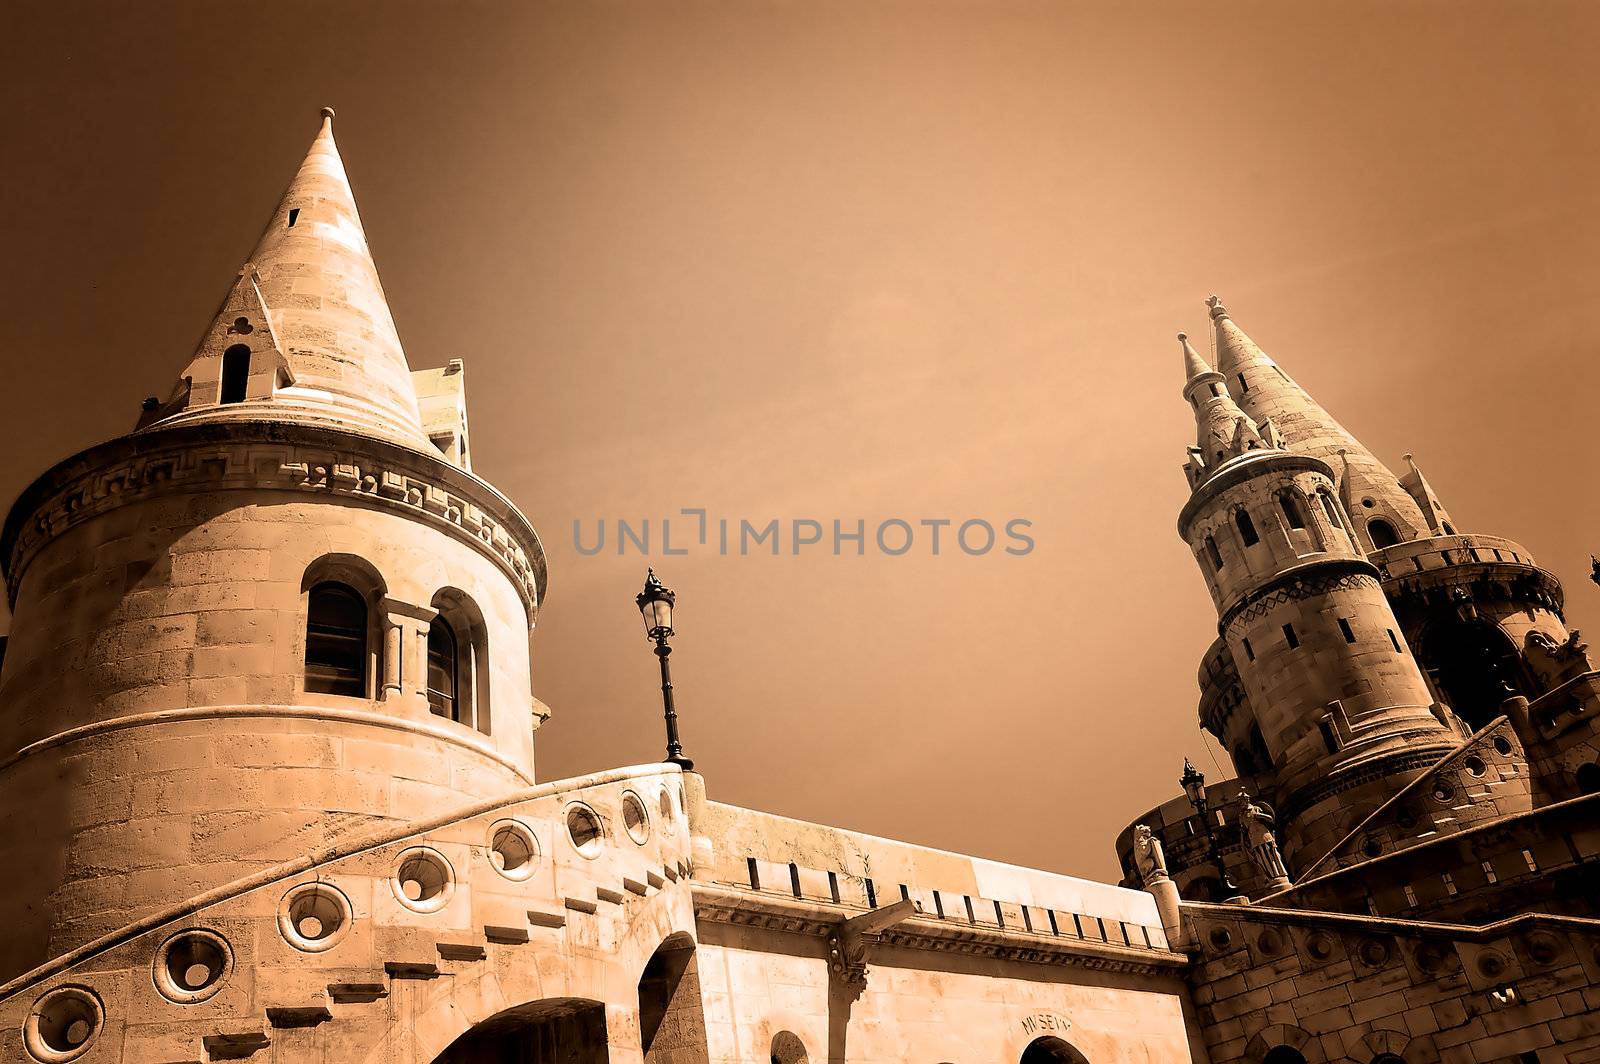 The great tower of Fishermen's Bastion on the castle hill of Budapest in sepia